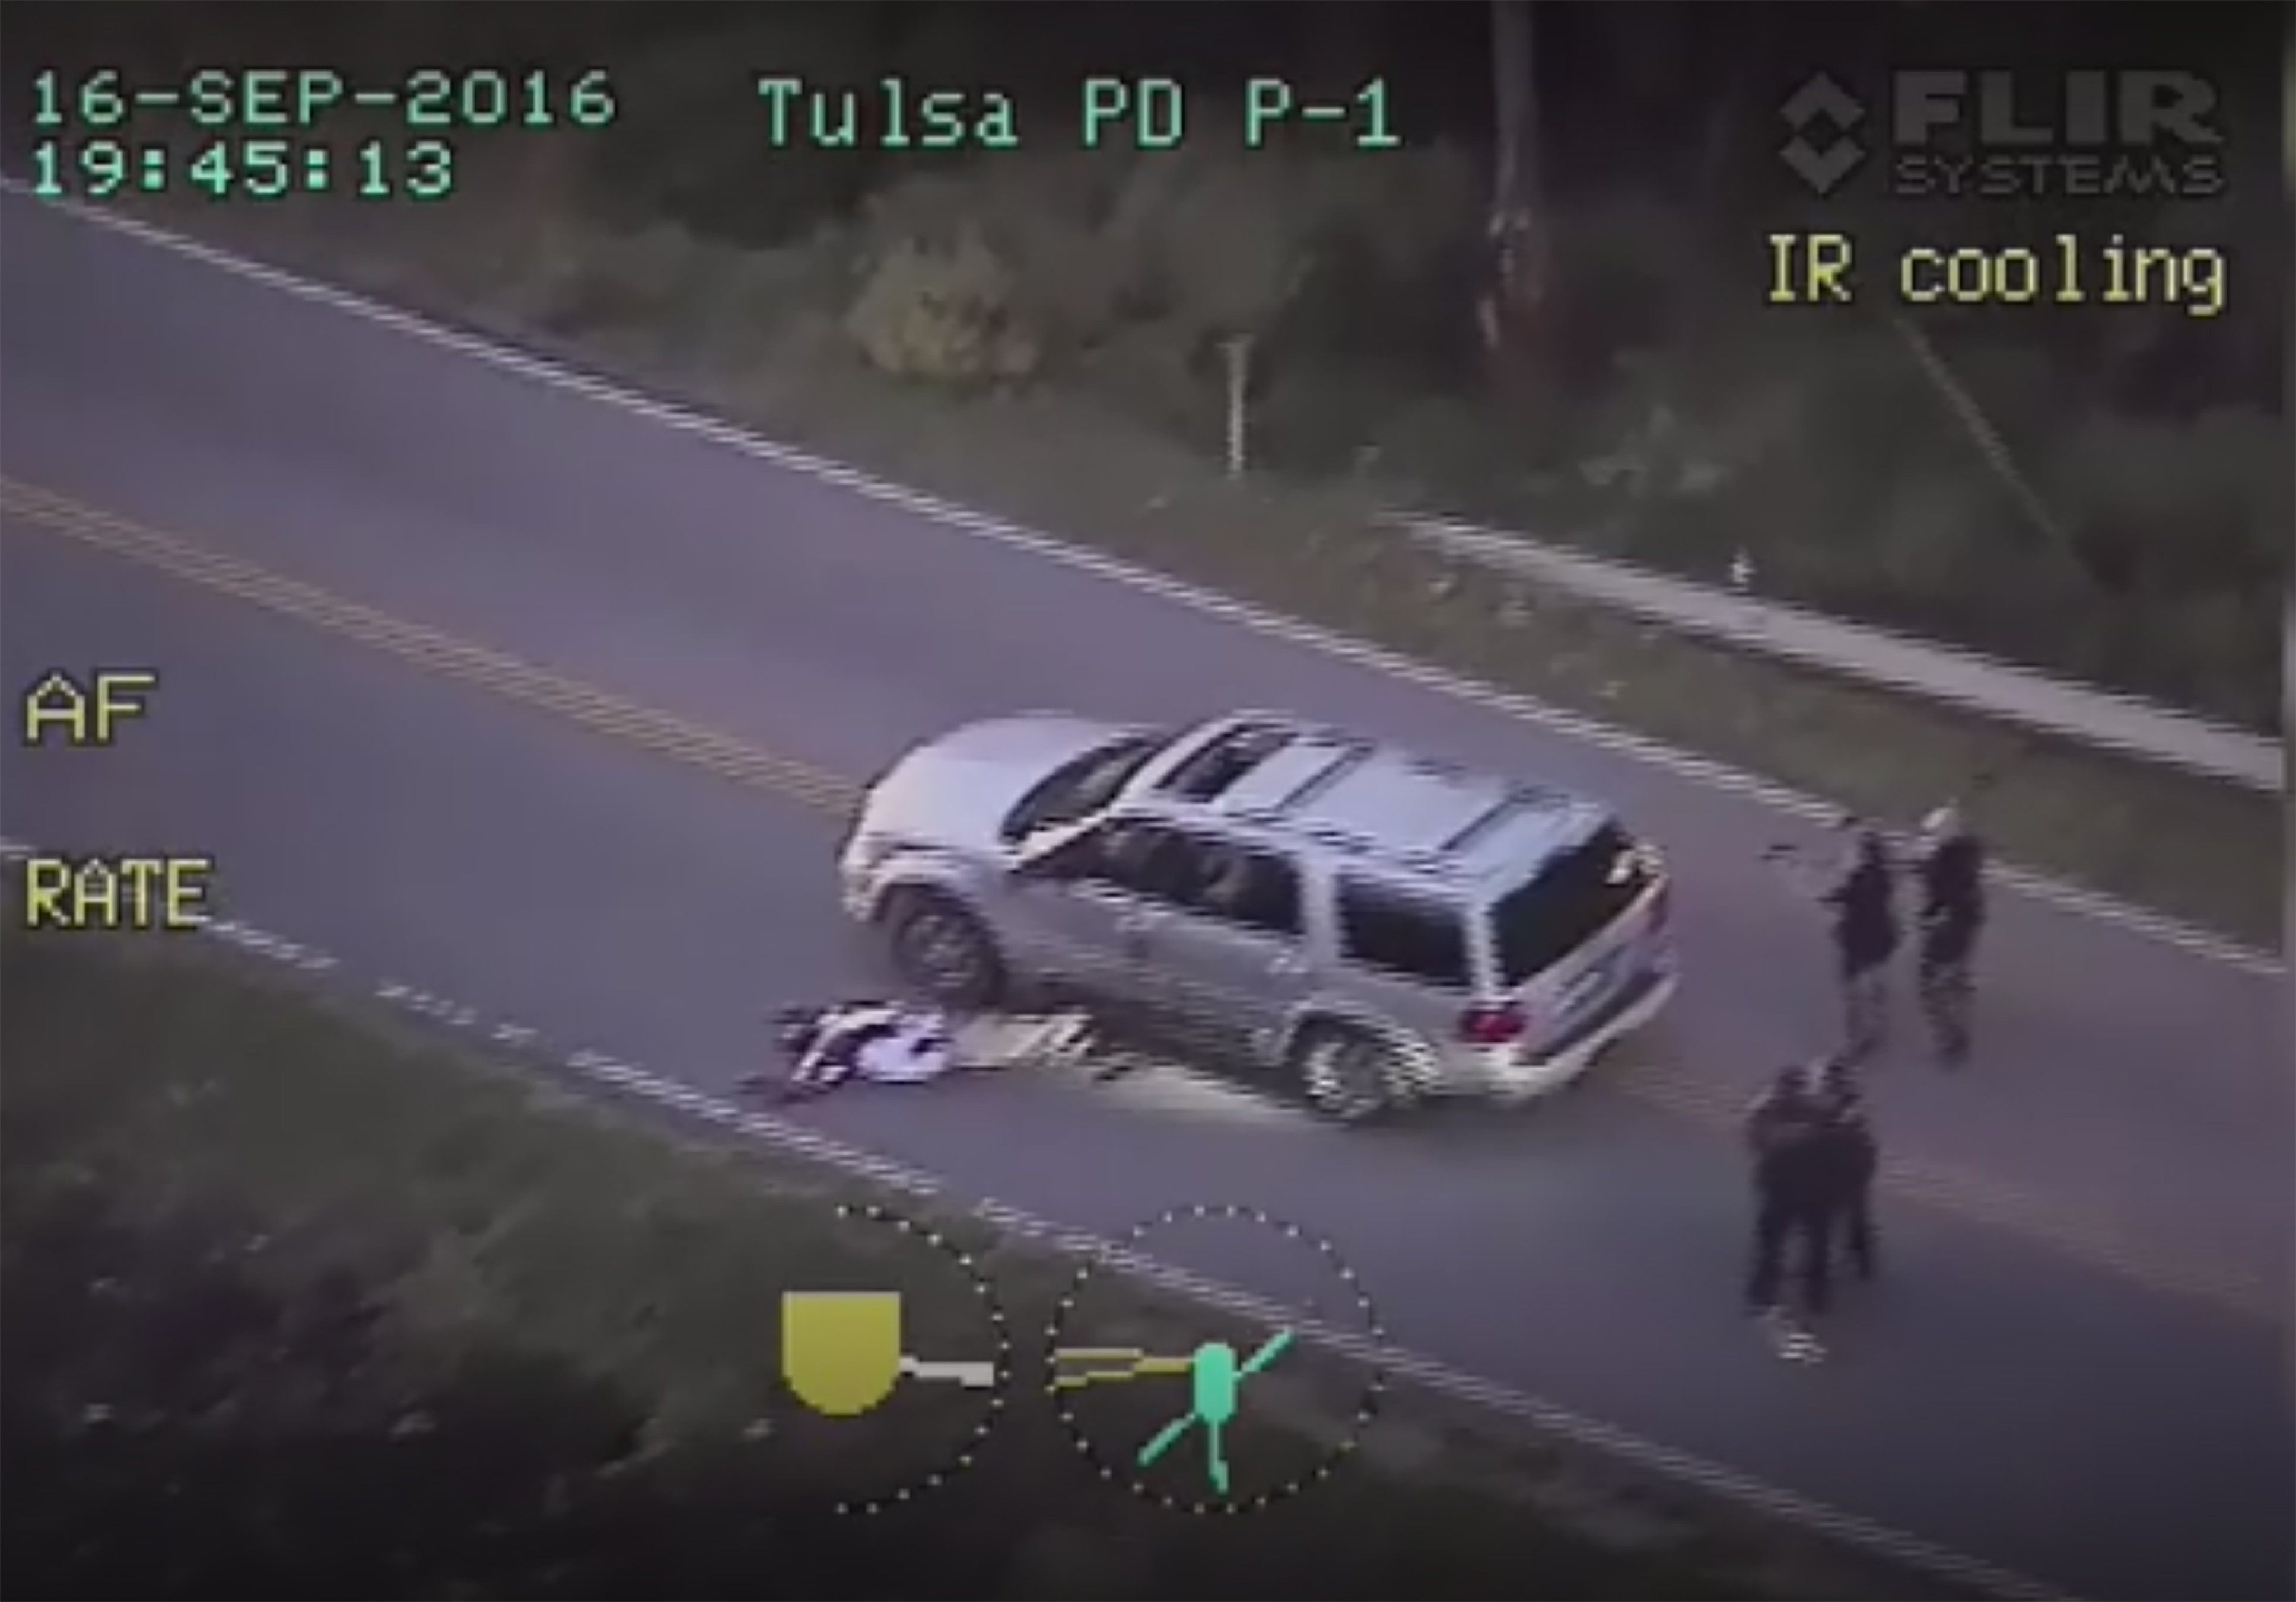 An image from a police helicopter video provided Sept. 20, 2016 by the Tulsa Police Department in Tulsa, Oklahoma, shows the officer involved shooting of Terence Crutcher. (Tulsa Police Department/AFP/Getty Images)